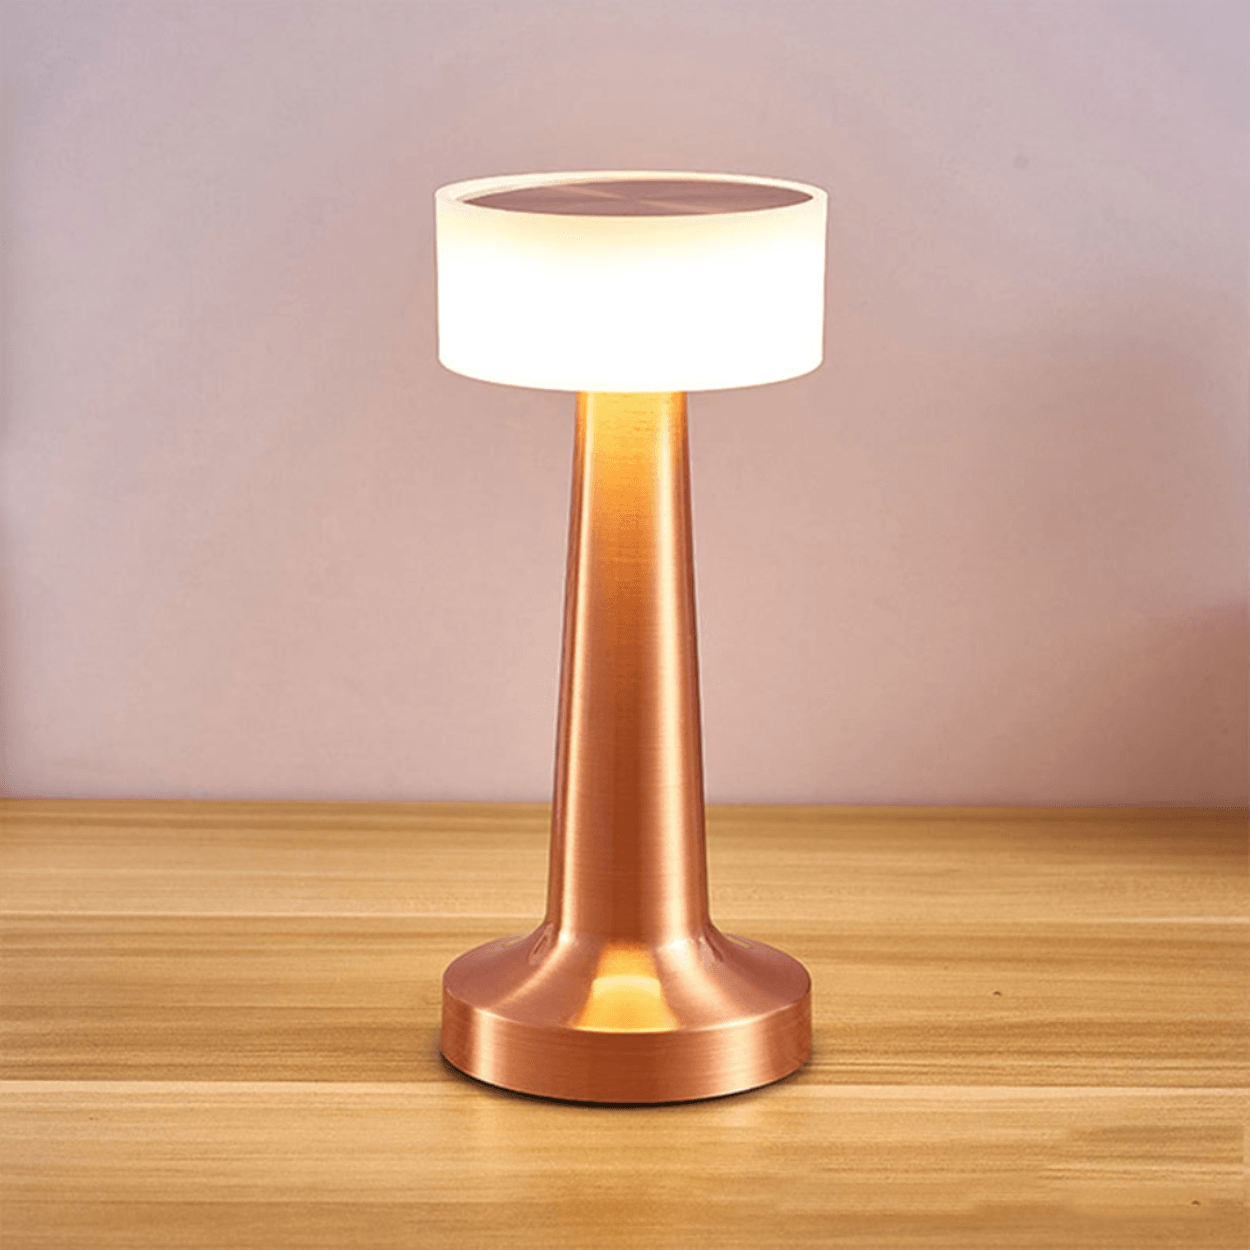 BARBELL RECHARGABLE TOUCH CONTROL WIRELESS BAR TABLE LAMP - Ankur Lighting